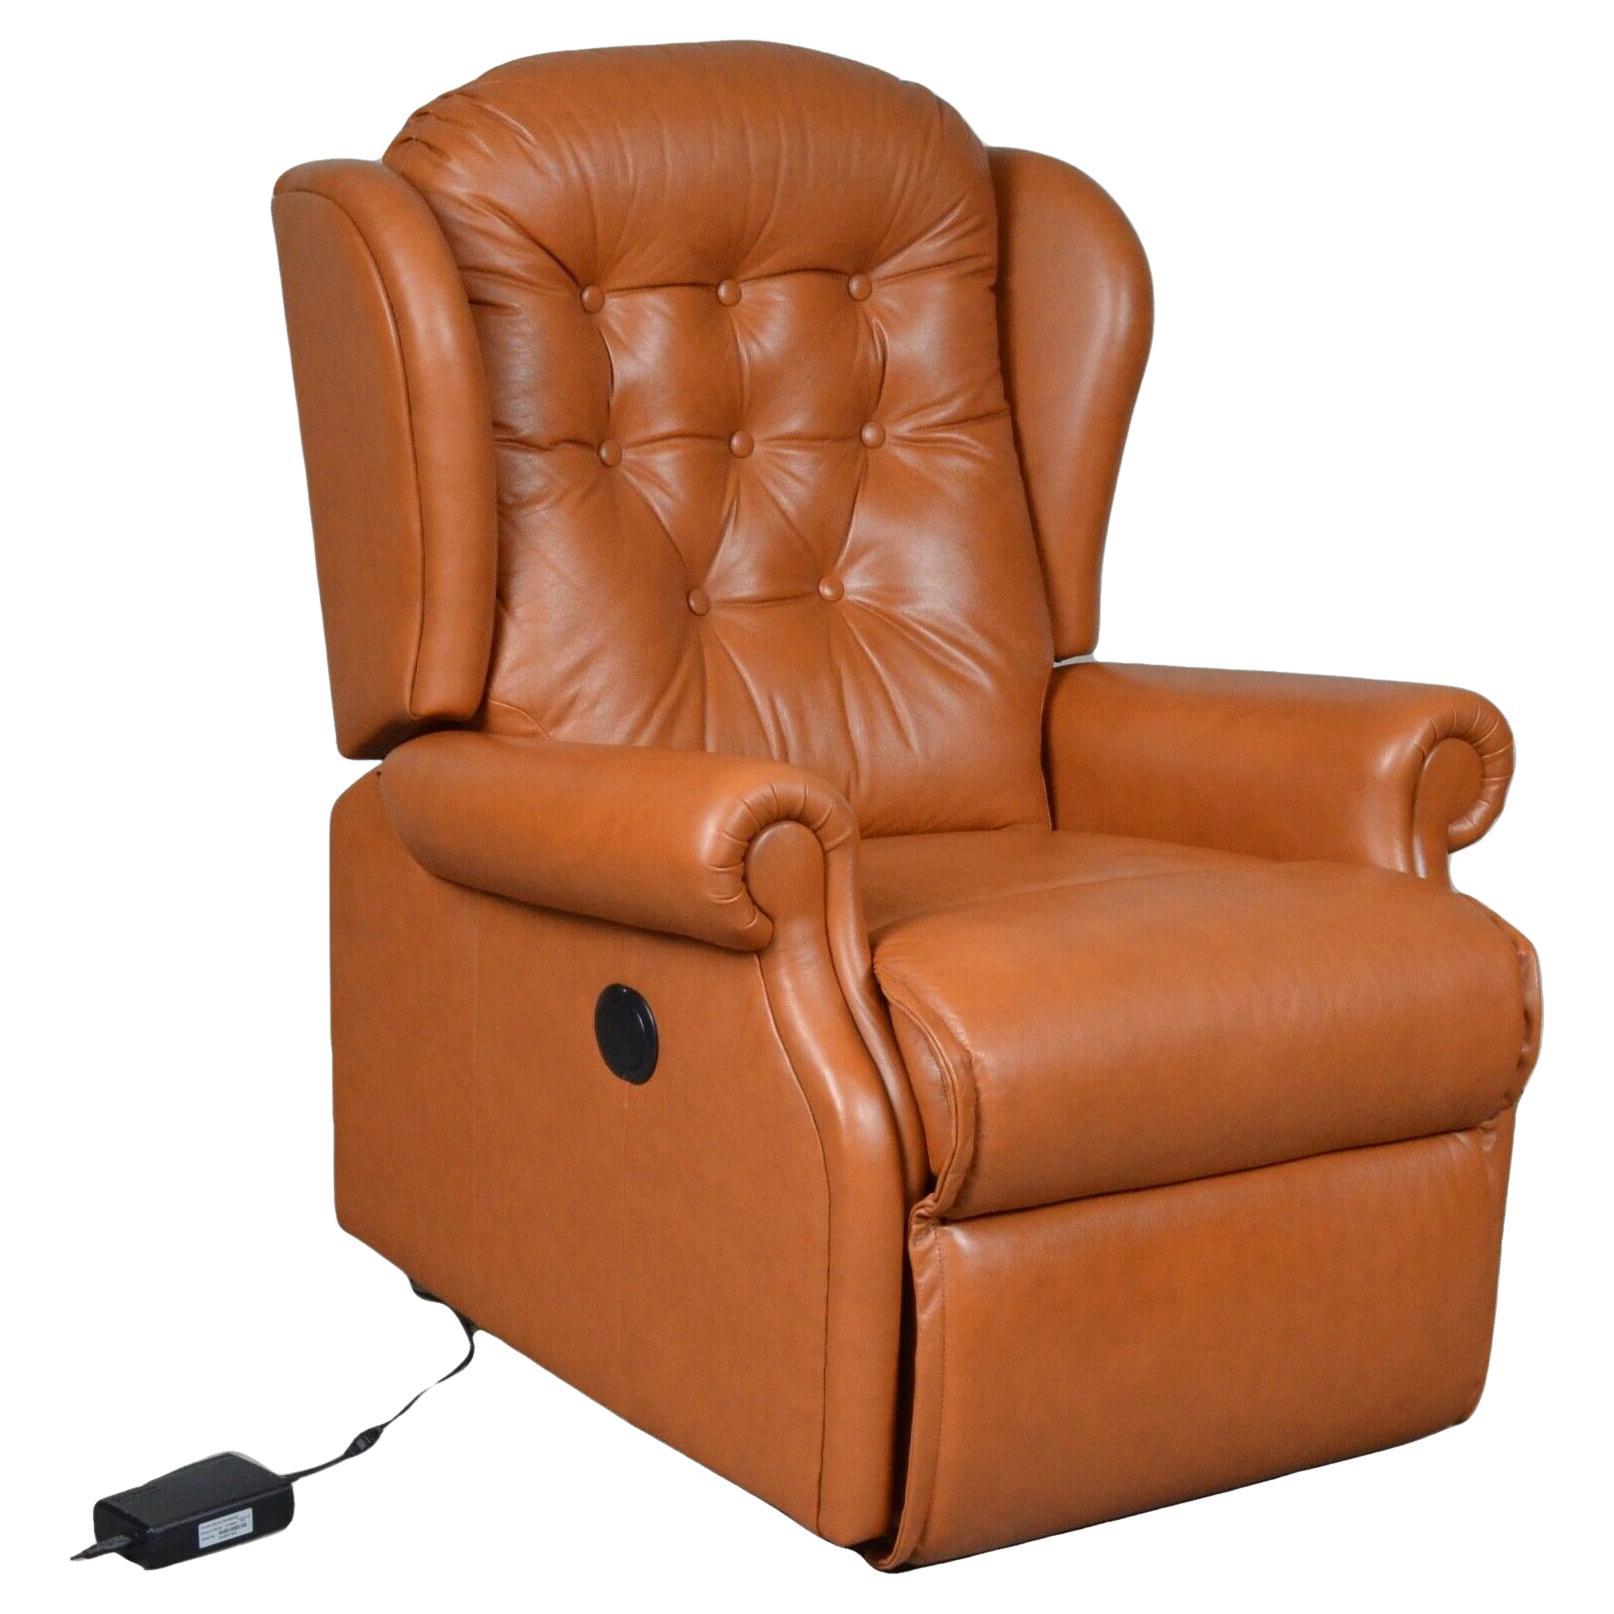 1 of 2 Tan Leather Electric Recliner Armchairs